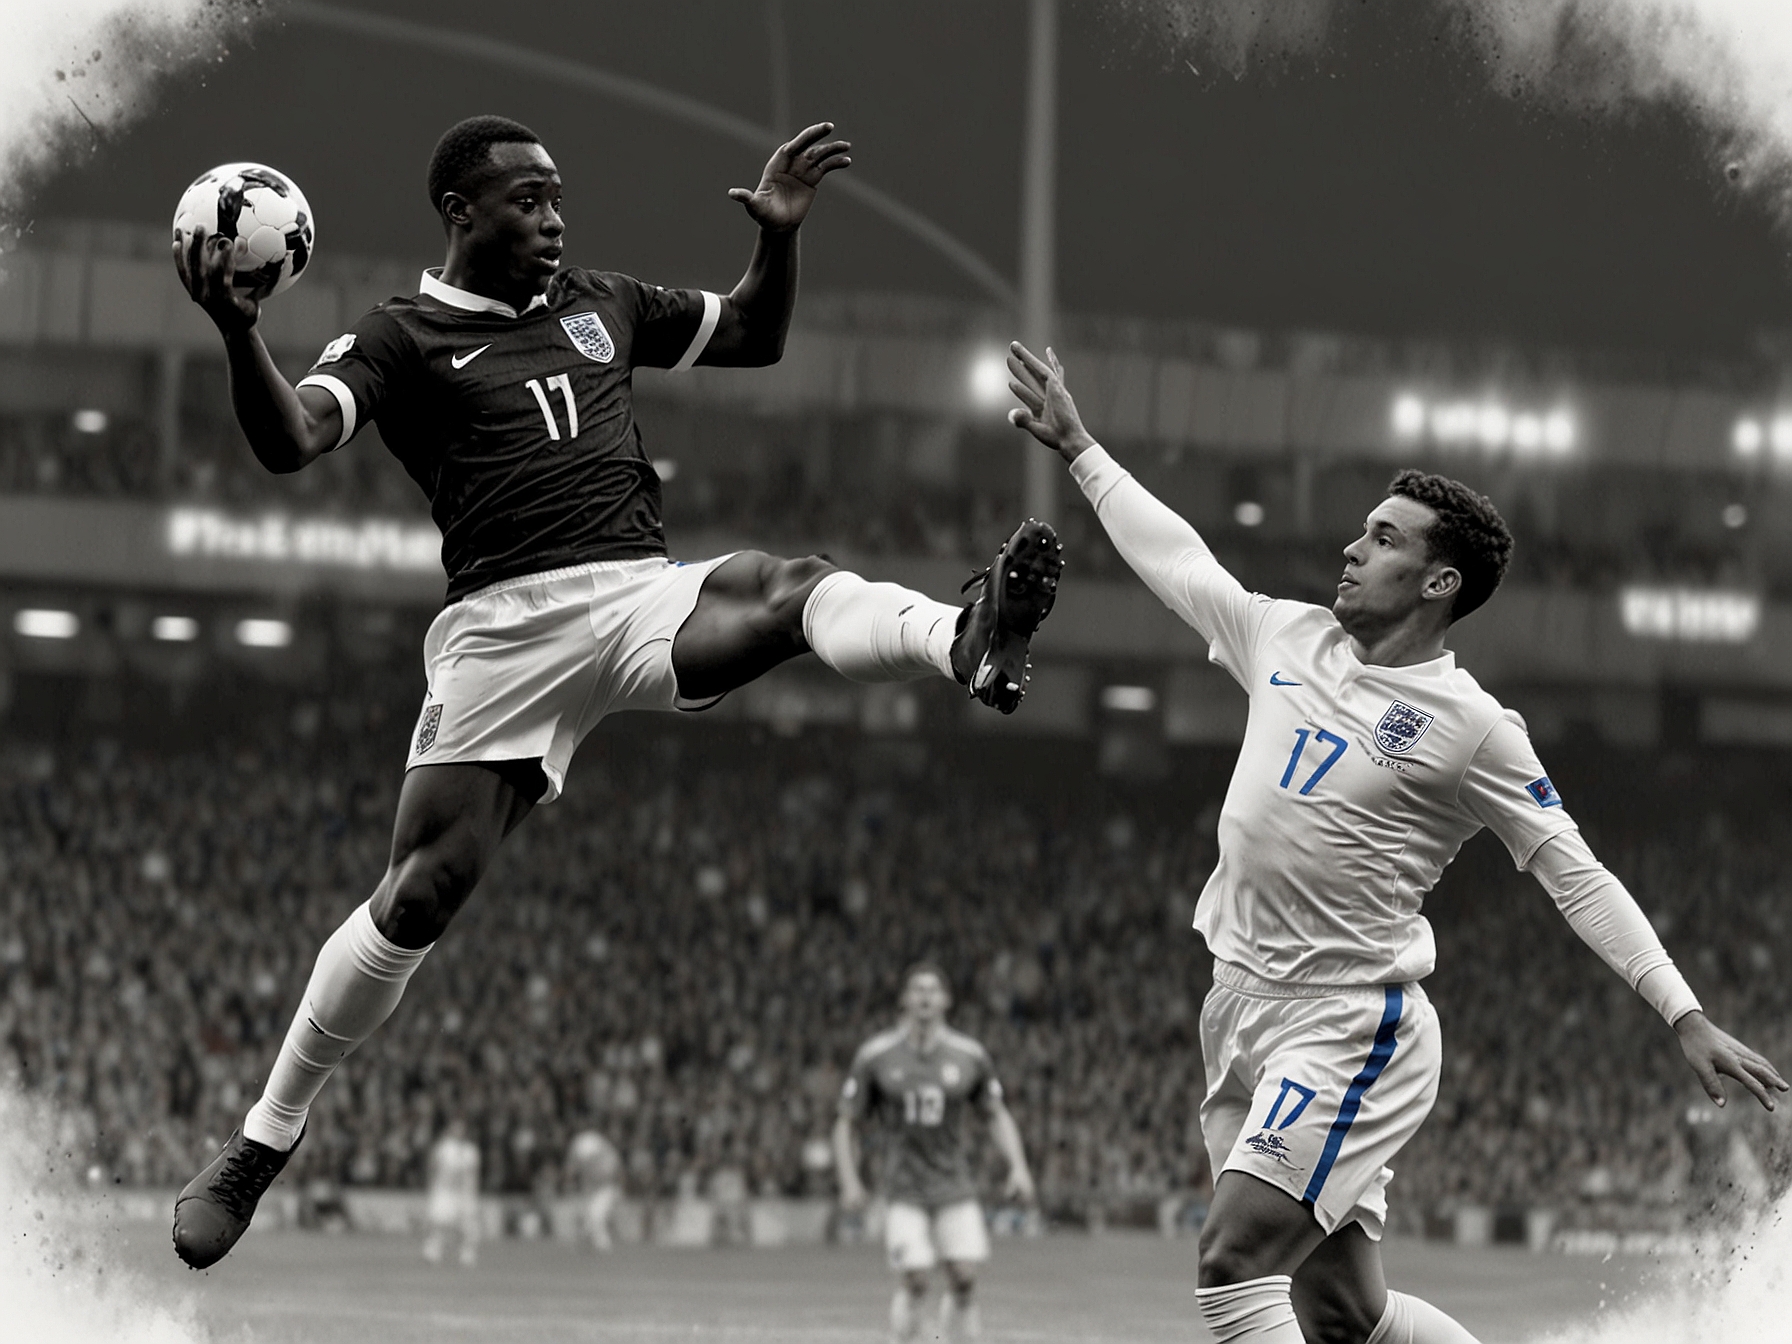 Marc Guehi, England's young center-back, clears the ball in an aerial duel, exemplifying his composure and tactical awareness in defense against the international opponent.